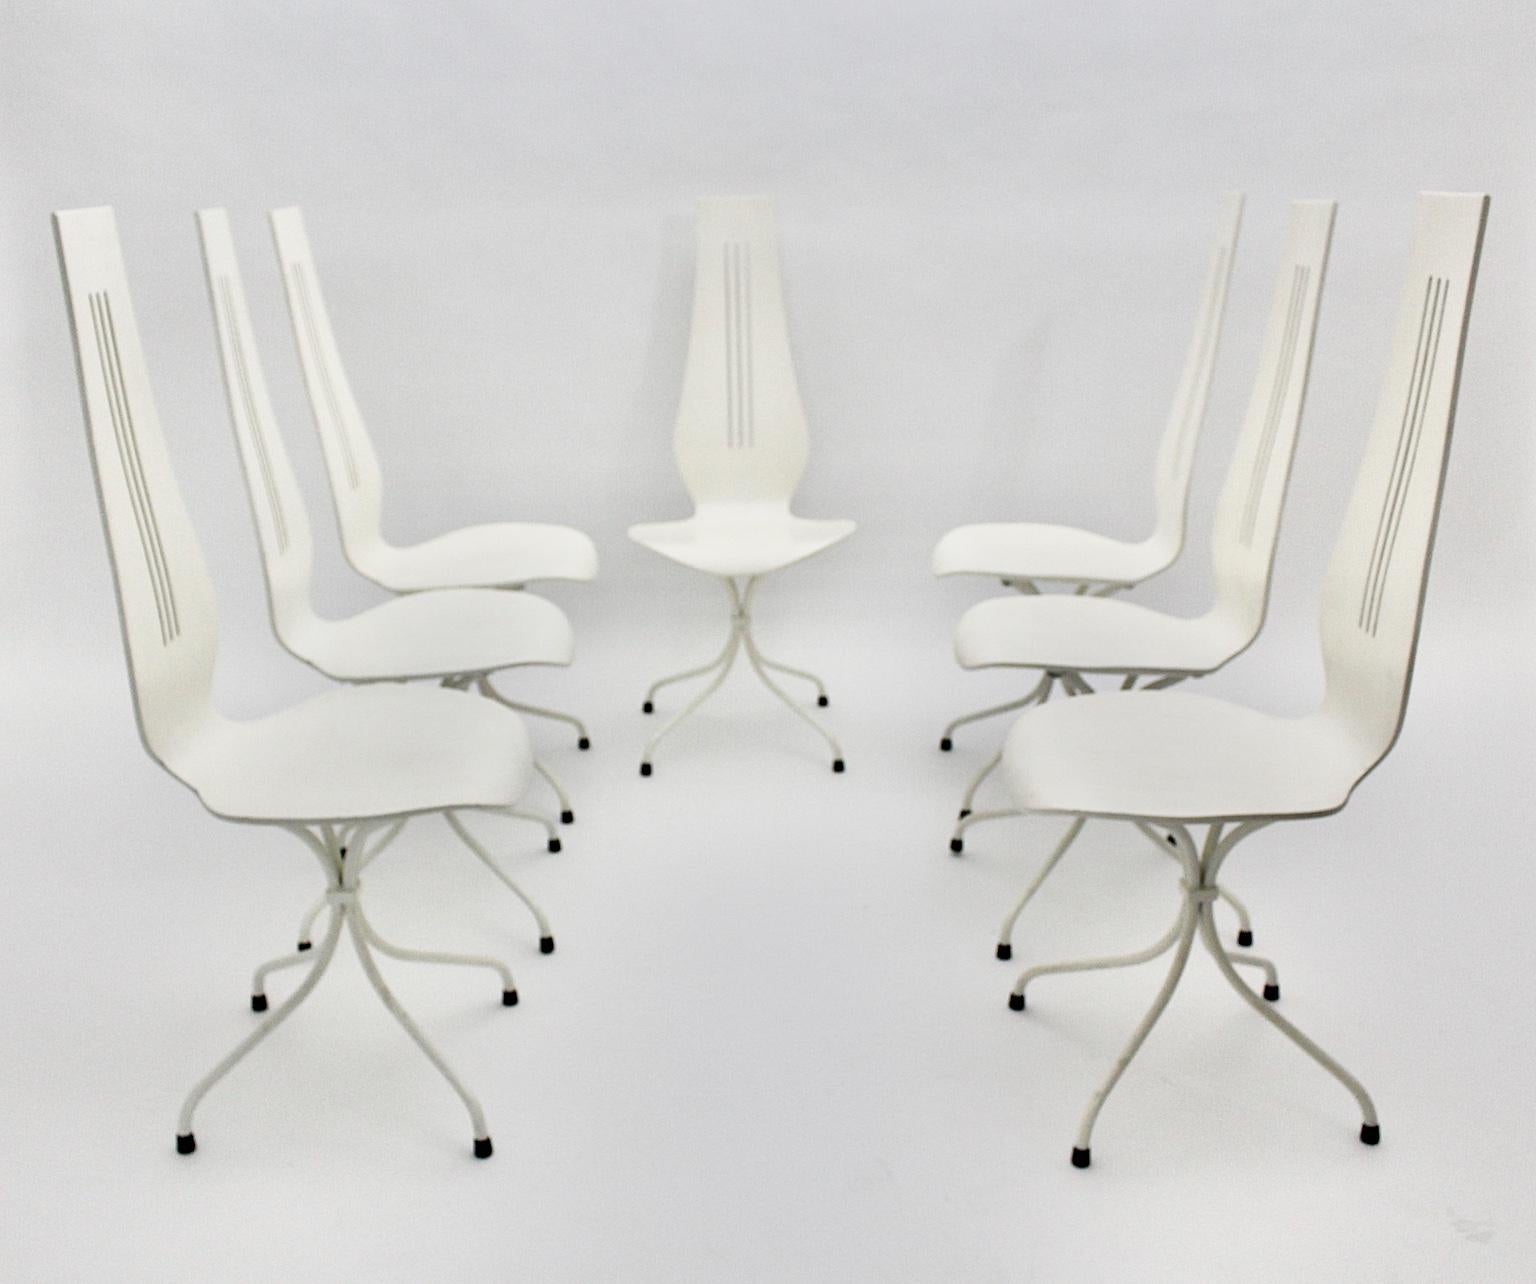 Swiss Mid-Century Modern White Vintage Dining Chairs by Theo Häberli, 1960 Switzerland For Sale